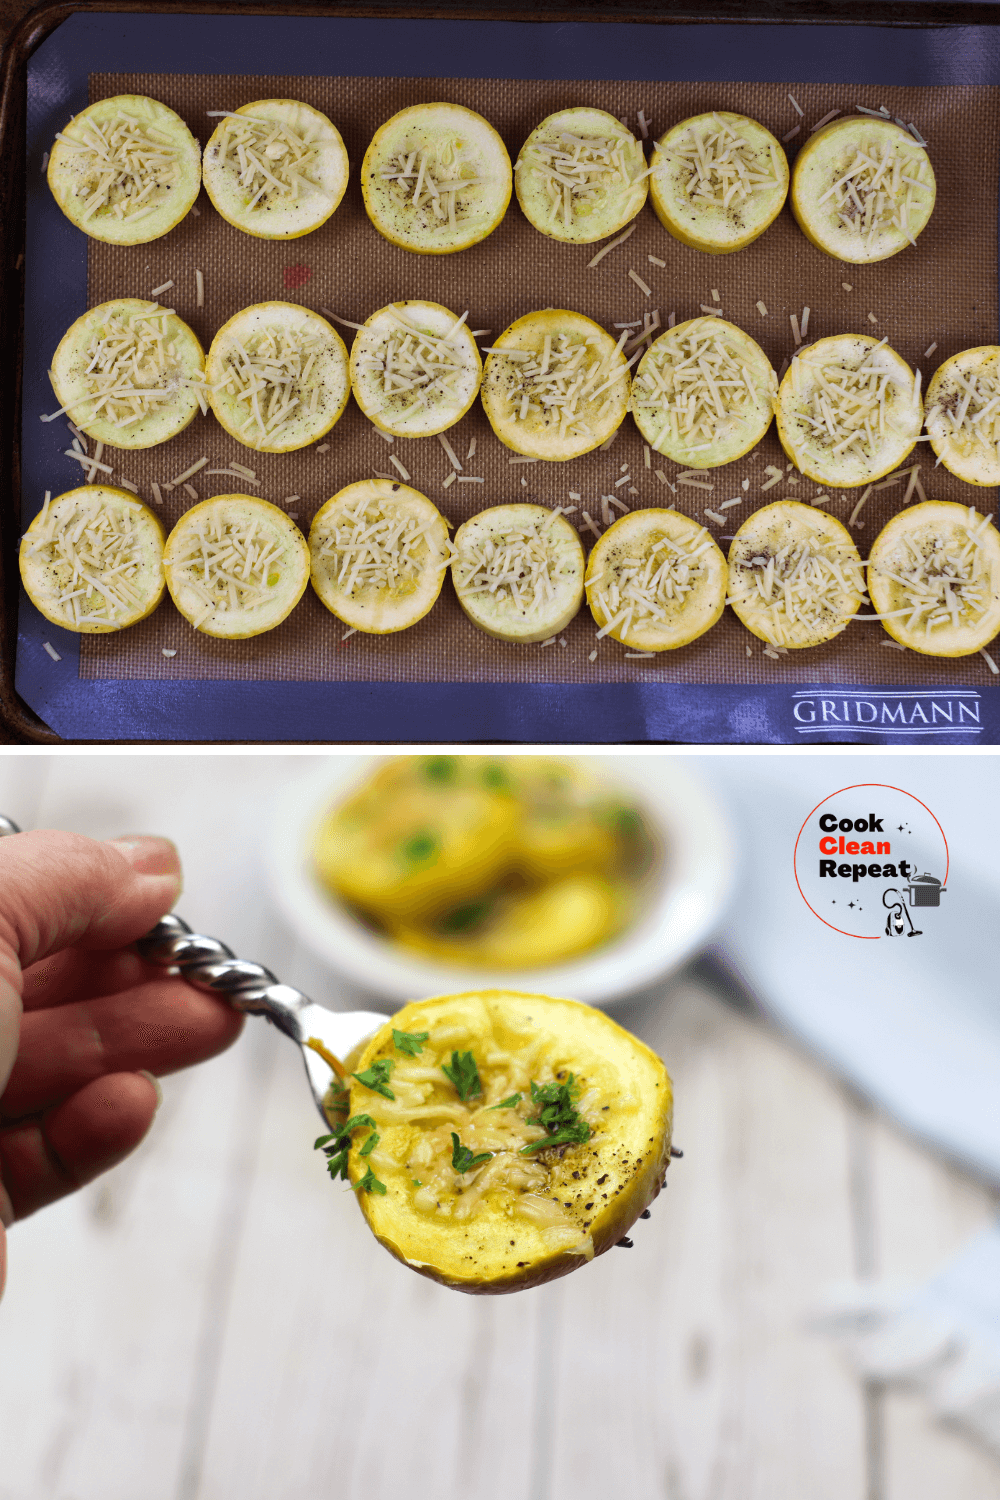 slices of yellow squash with grated cheese in baking pan